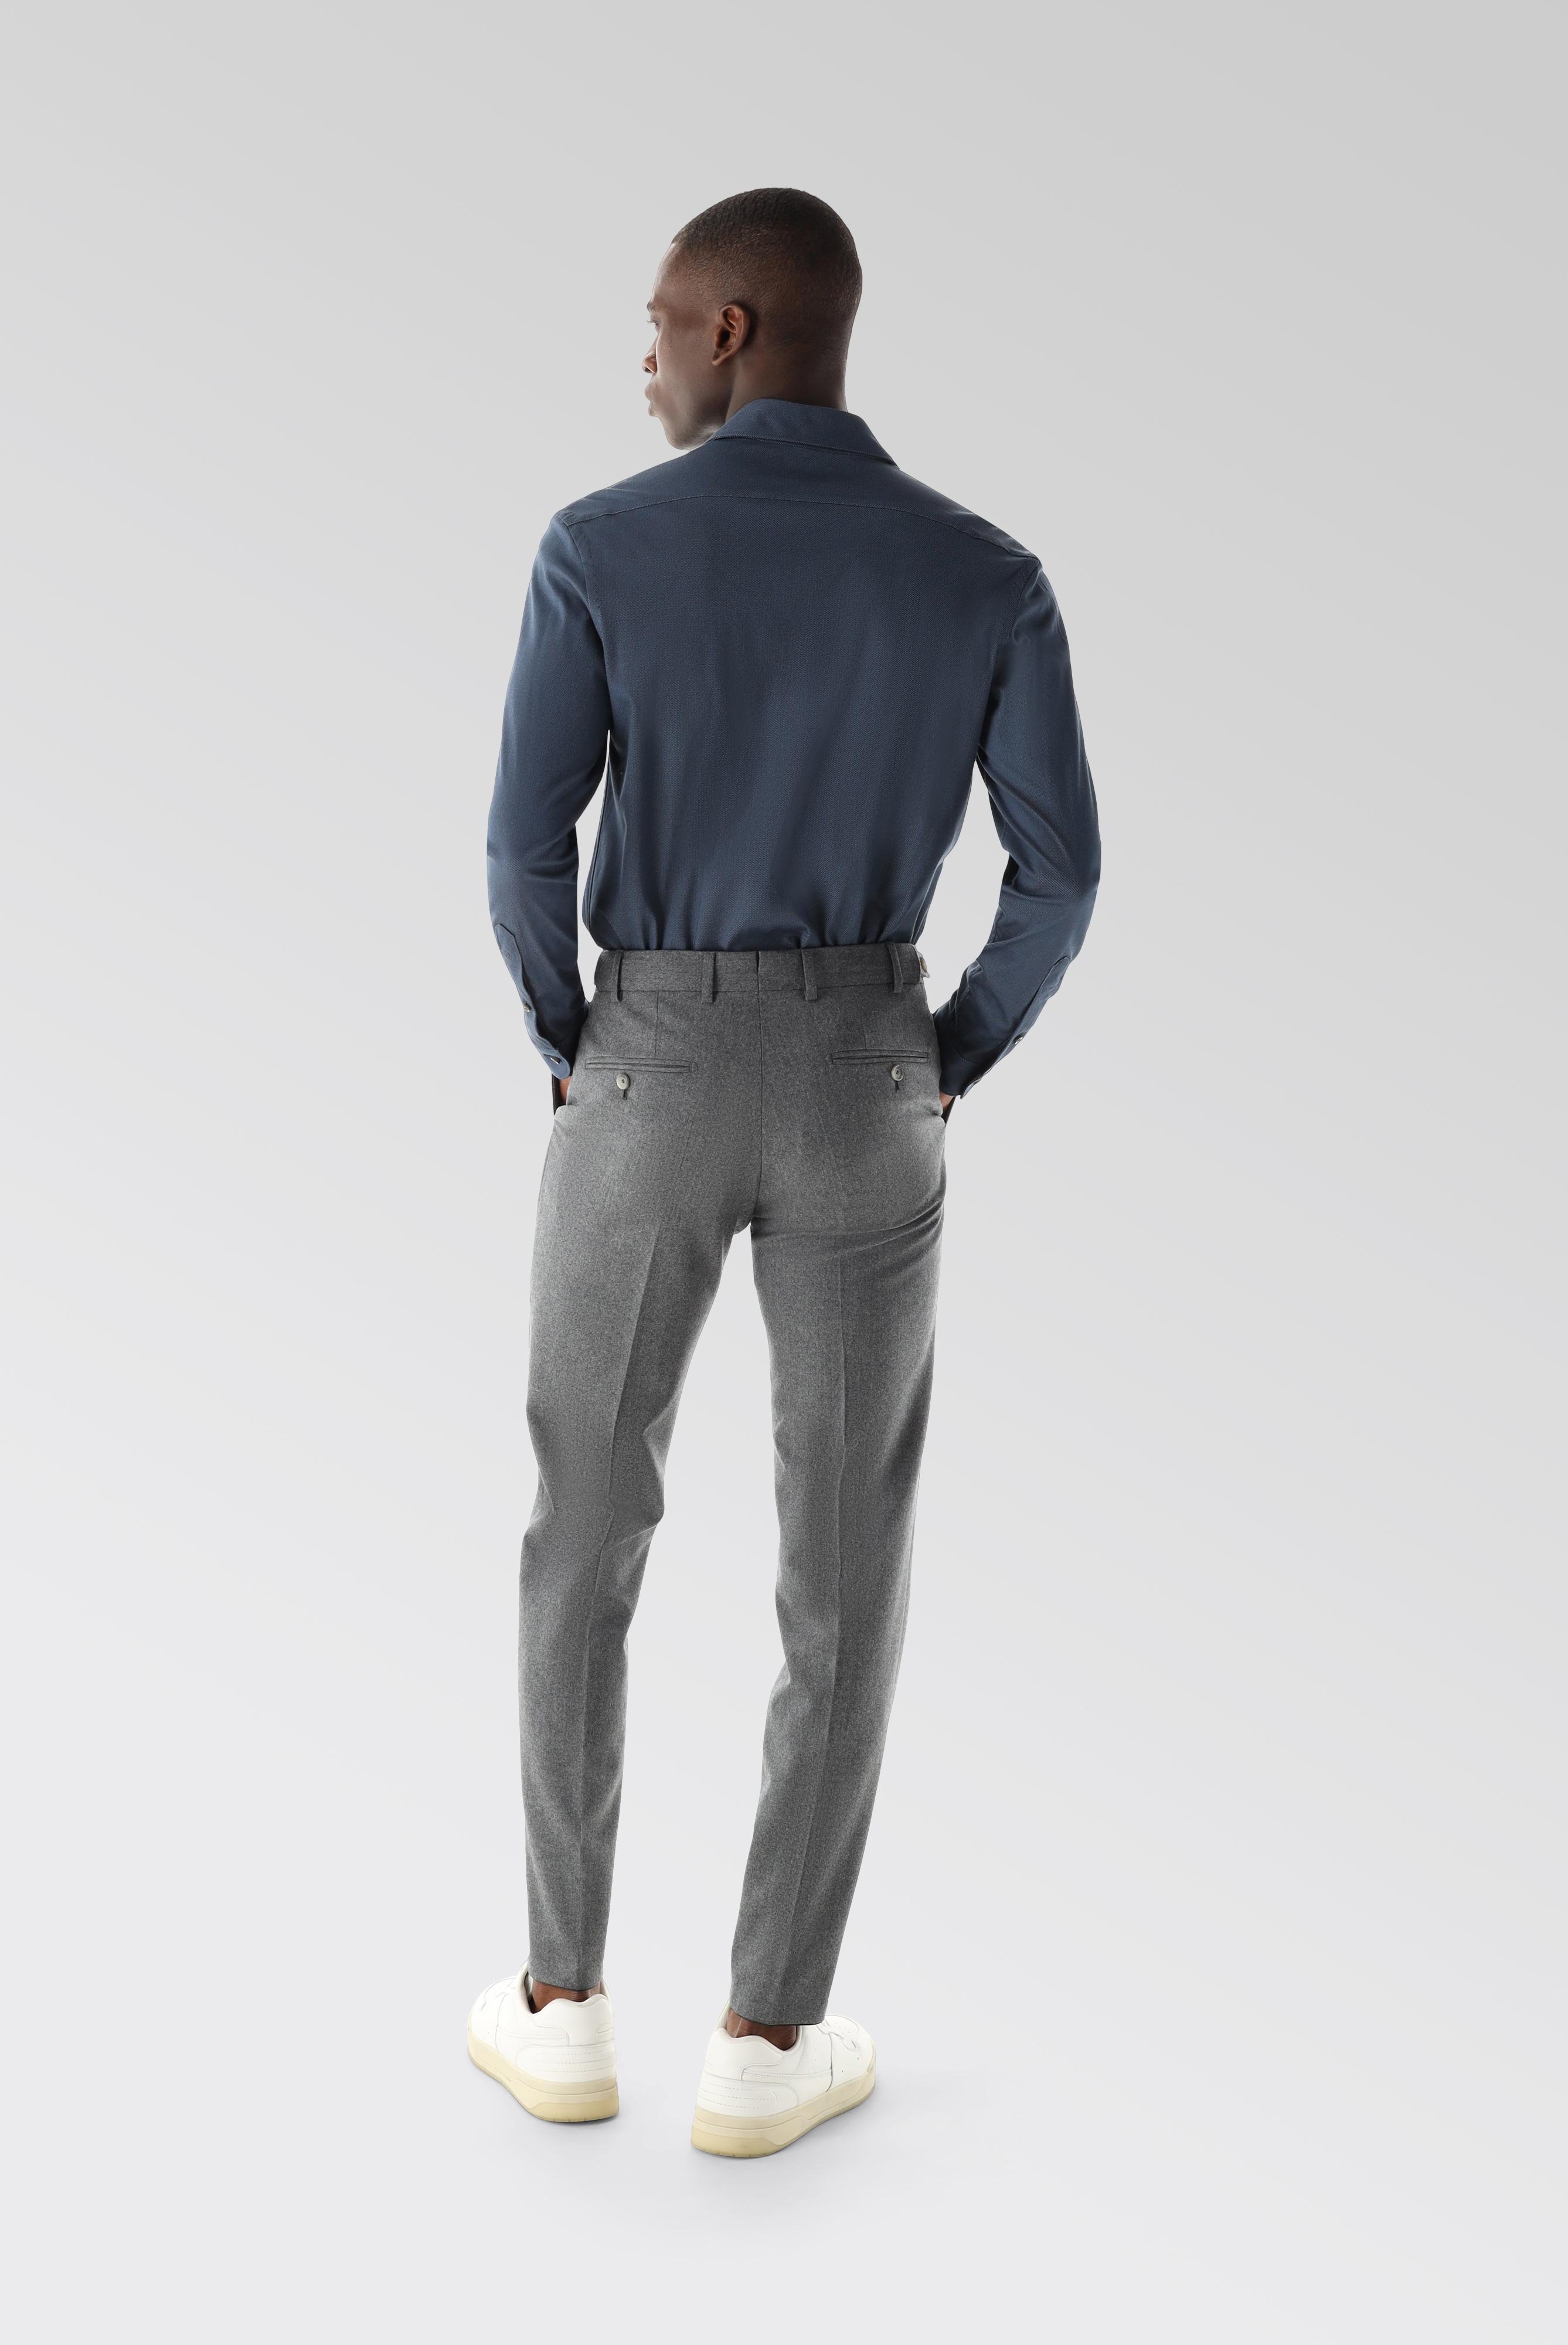 Casual Shirts+Jersey Shirt with a Twill Print Tailor Fit+20.1683.UC.187749.782.M